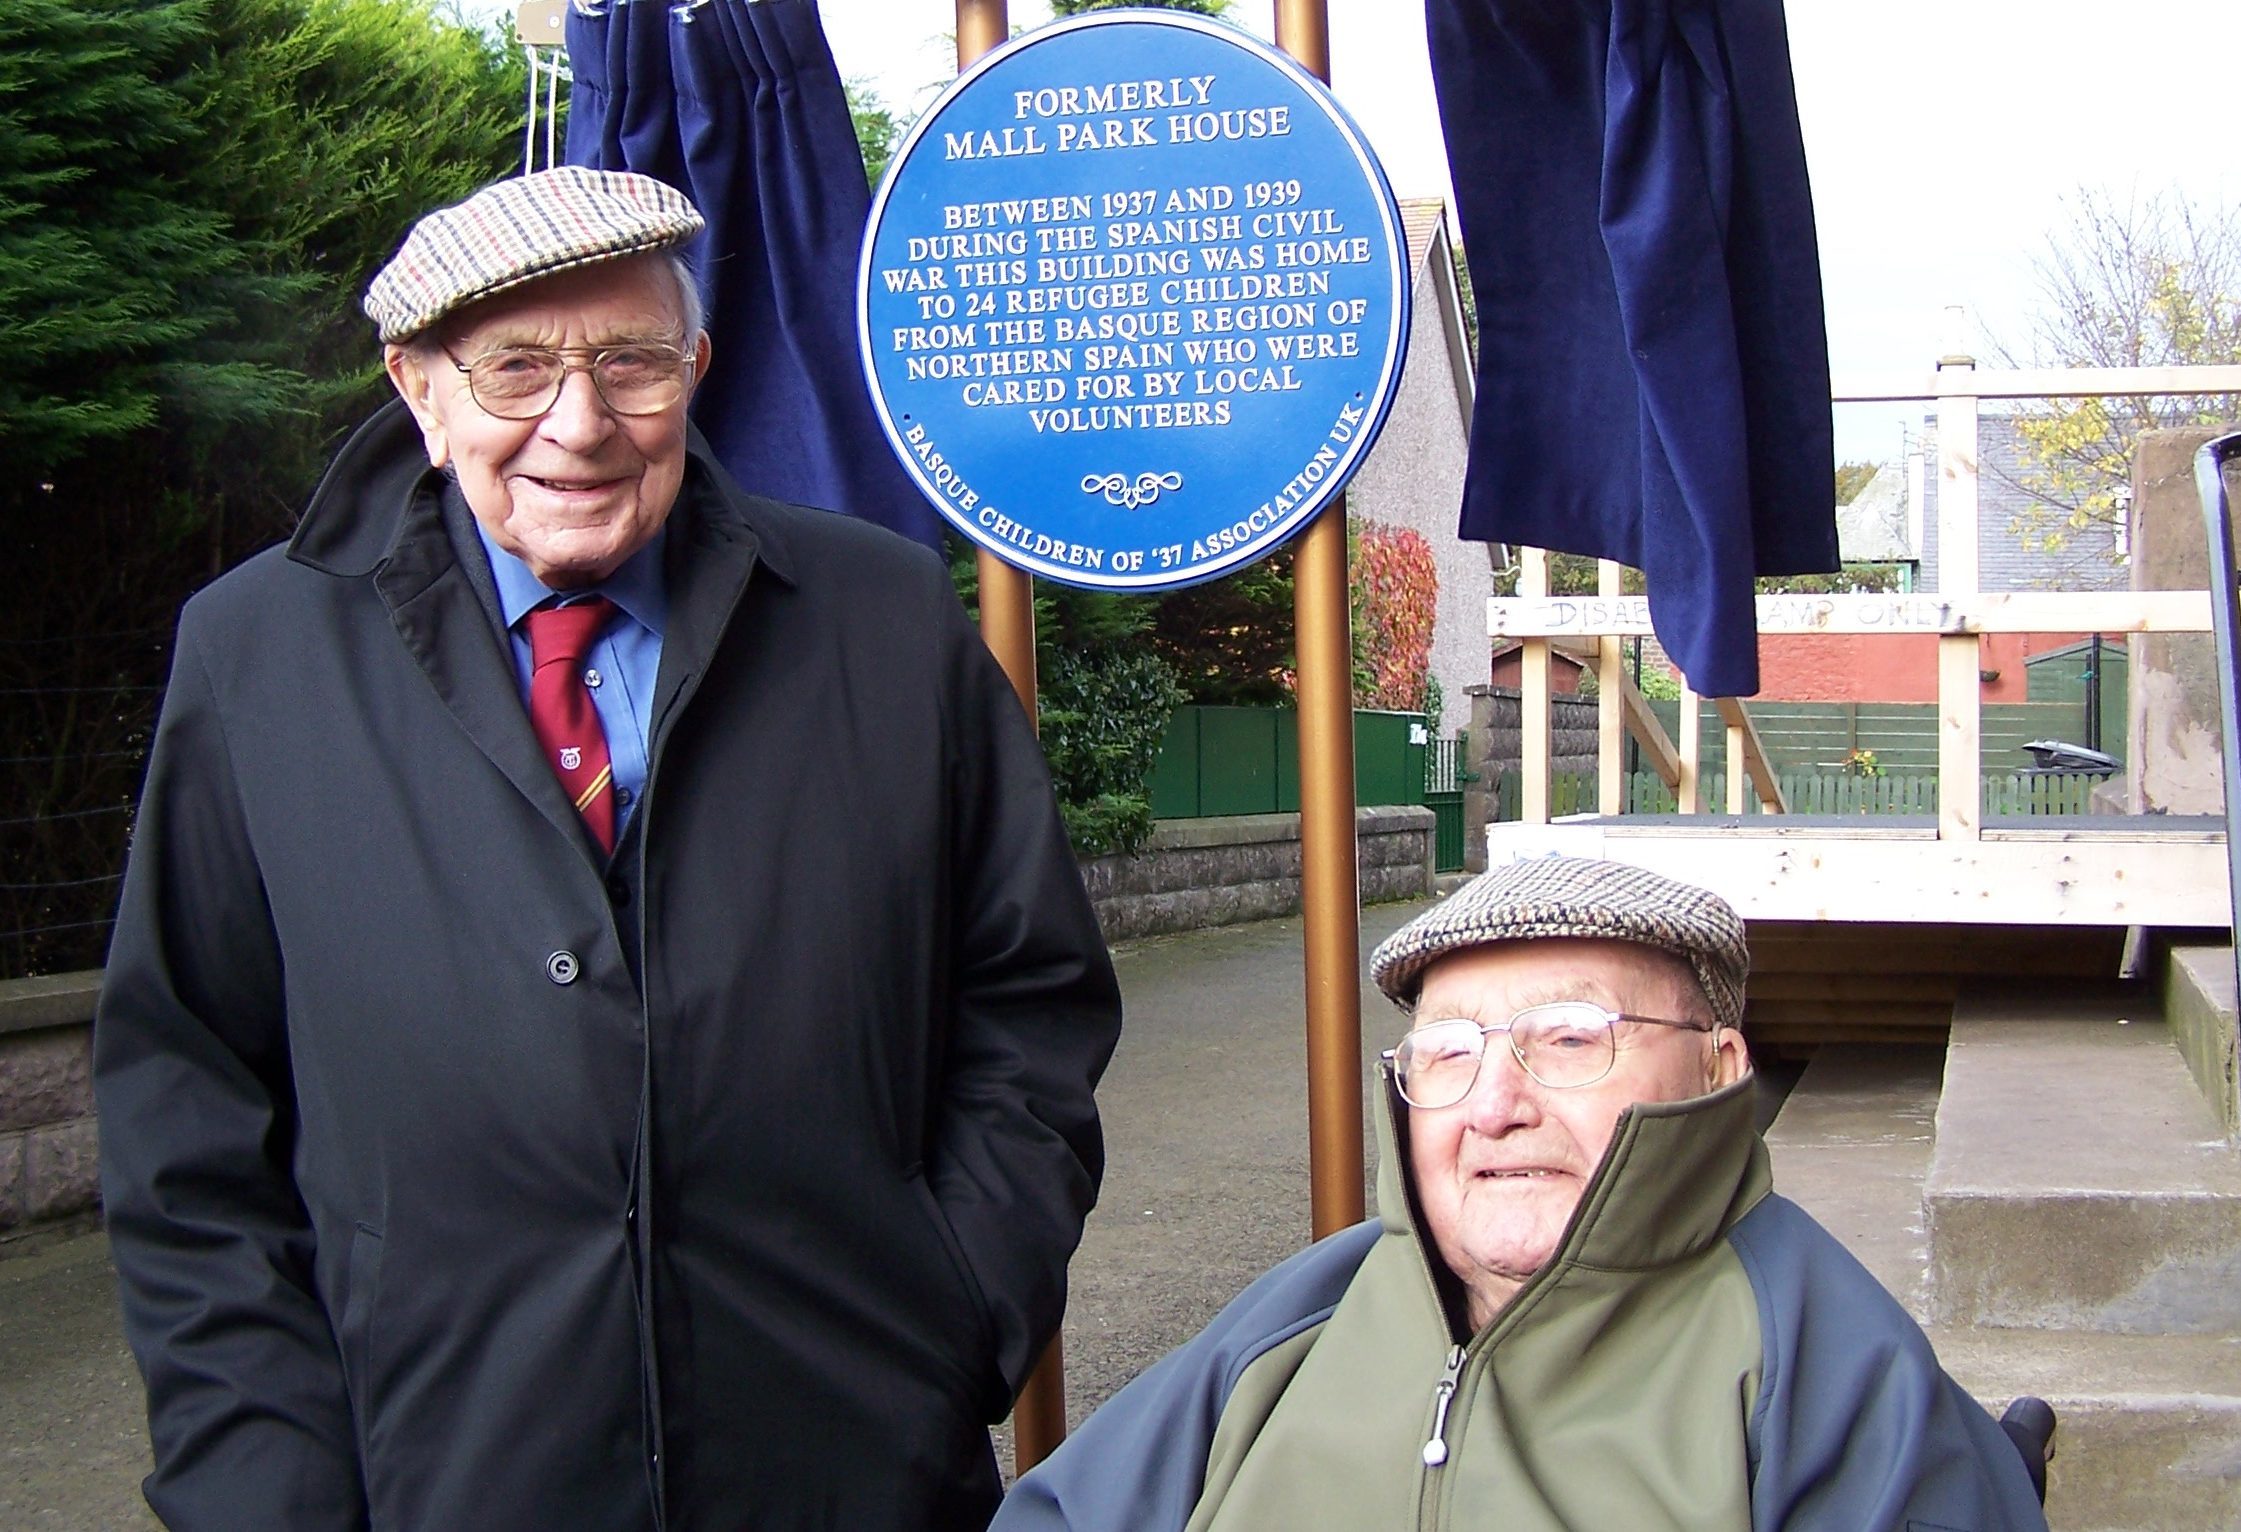 Taken at the unveiling of the commemorative plaque in Montrose in 2007. Picture shows
(left) Jack Jones, the former general secretary of the Transport and General Workers Union, and volunteer at the time, Jack Edwards.